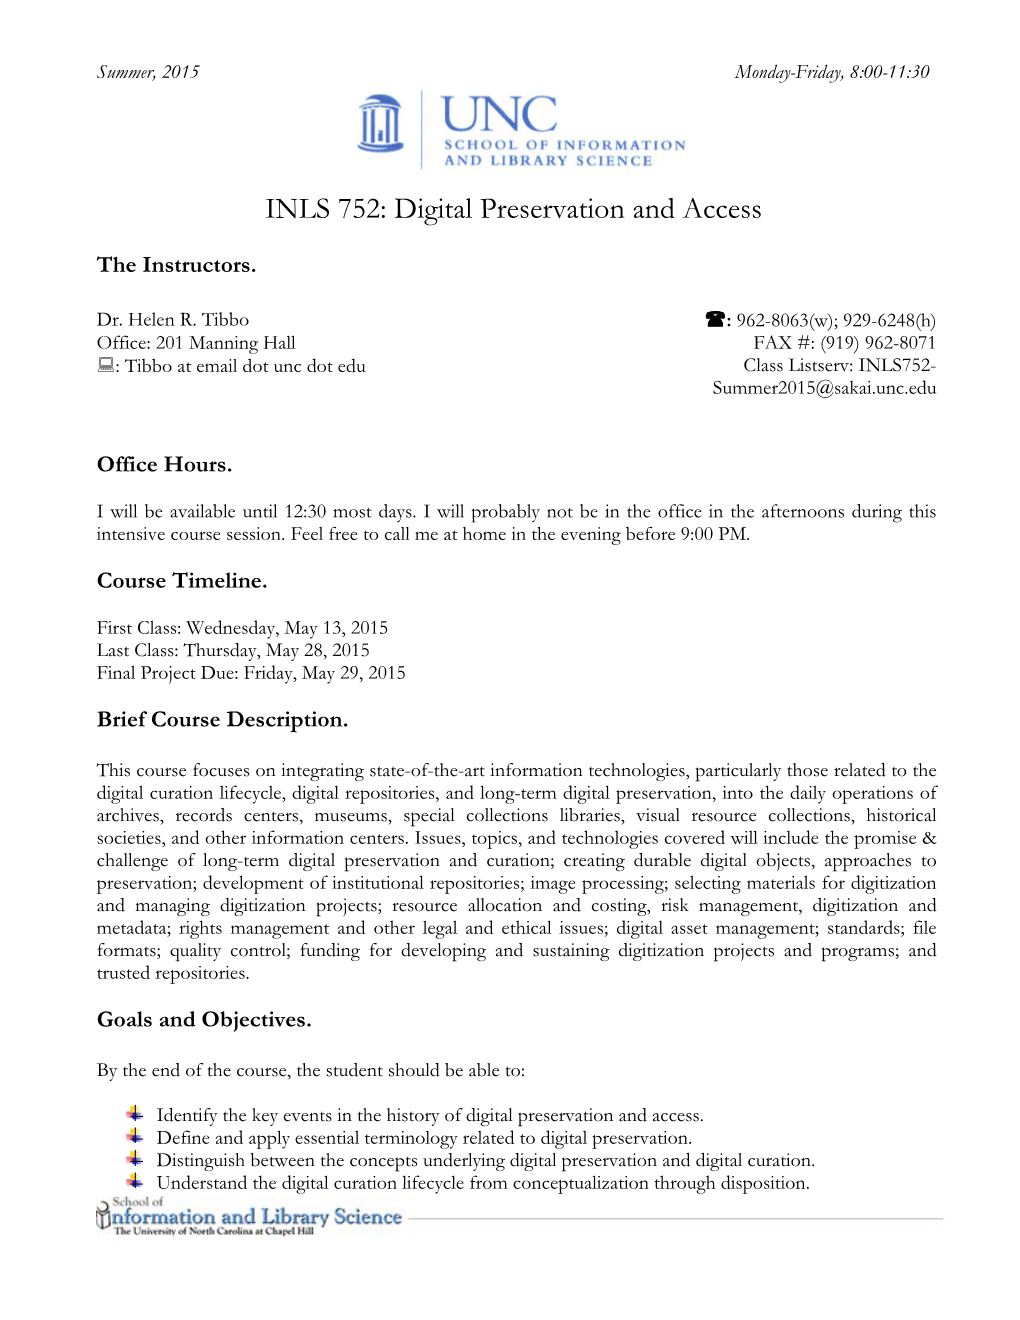 INLS 752: Digital Preservation and Access